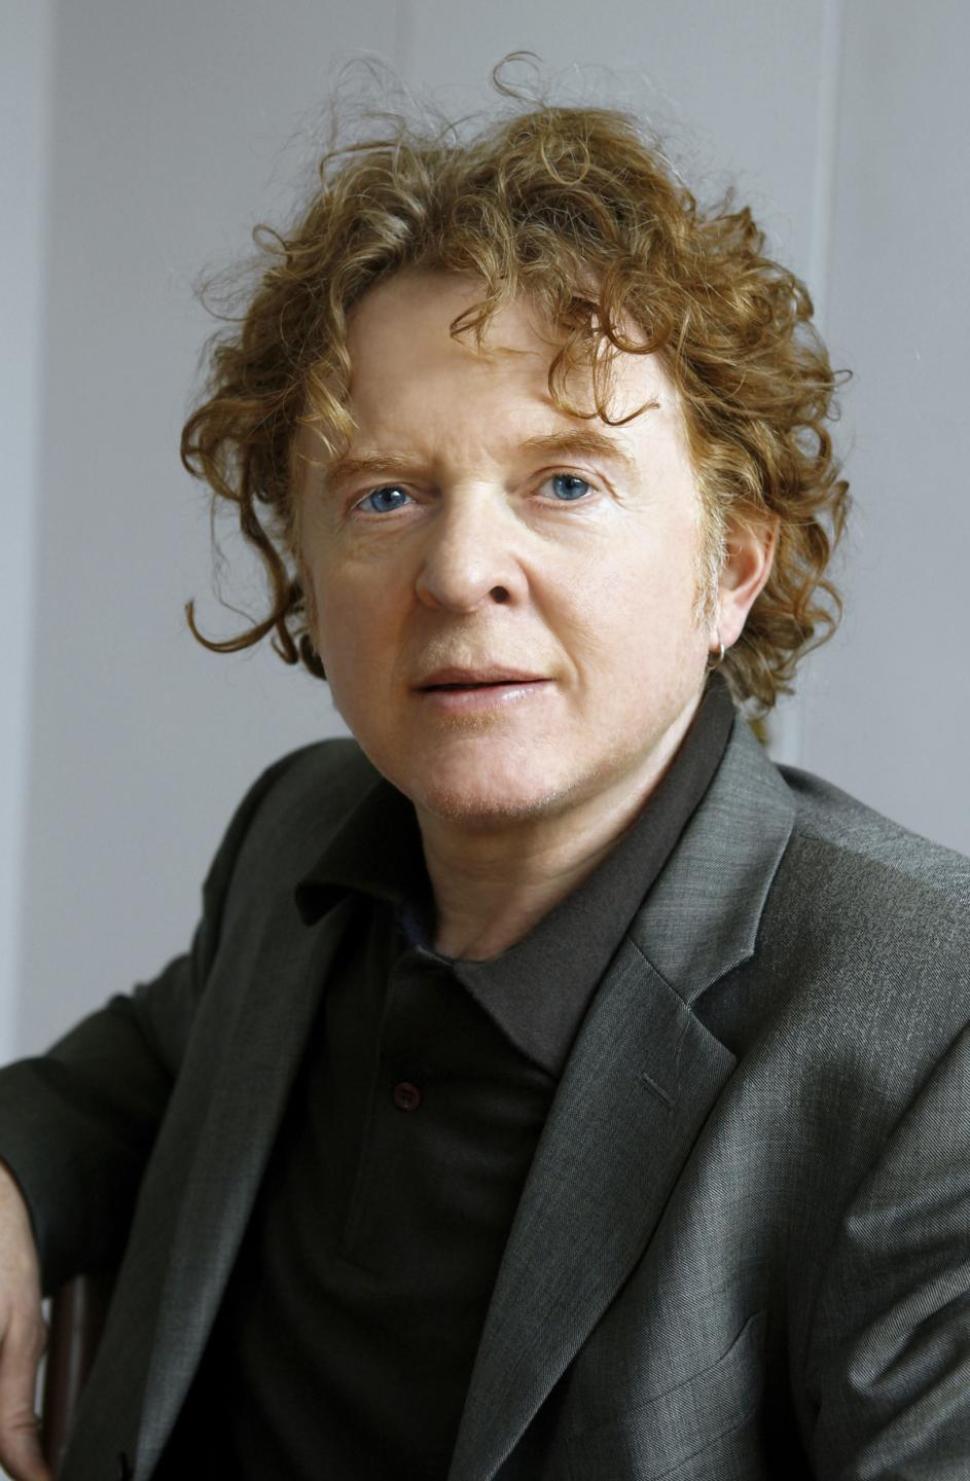 Mick Hucknall has revealed that he had a thyroid condition that went undiagnosed for years.